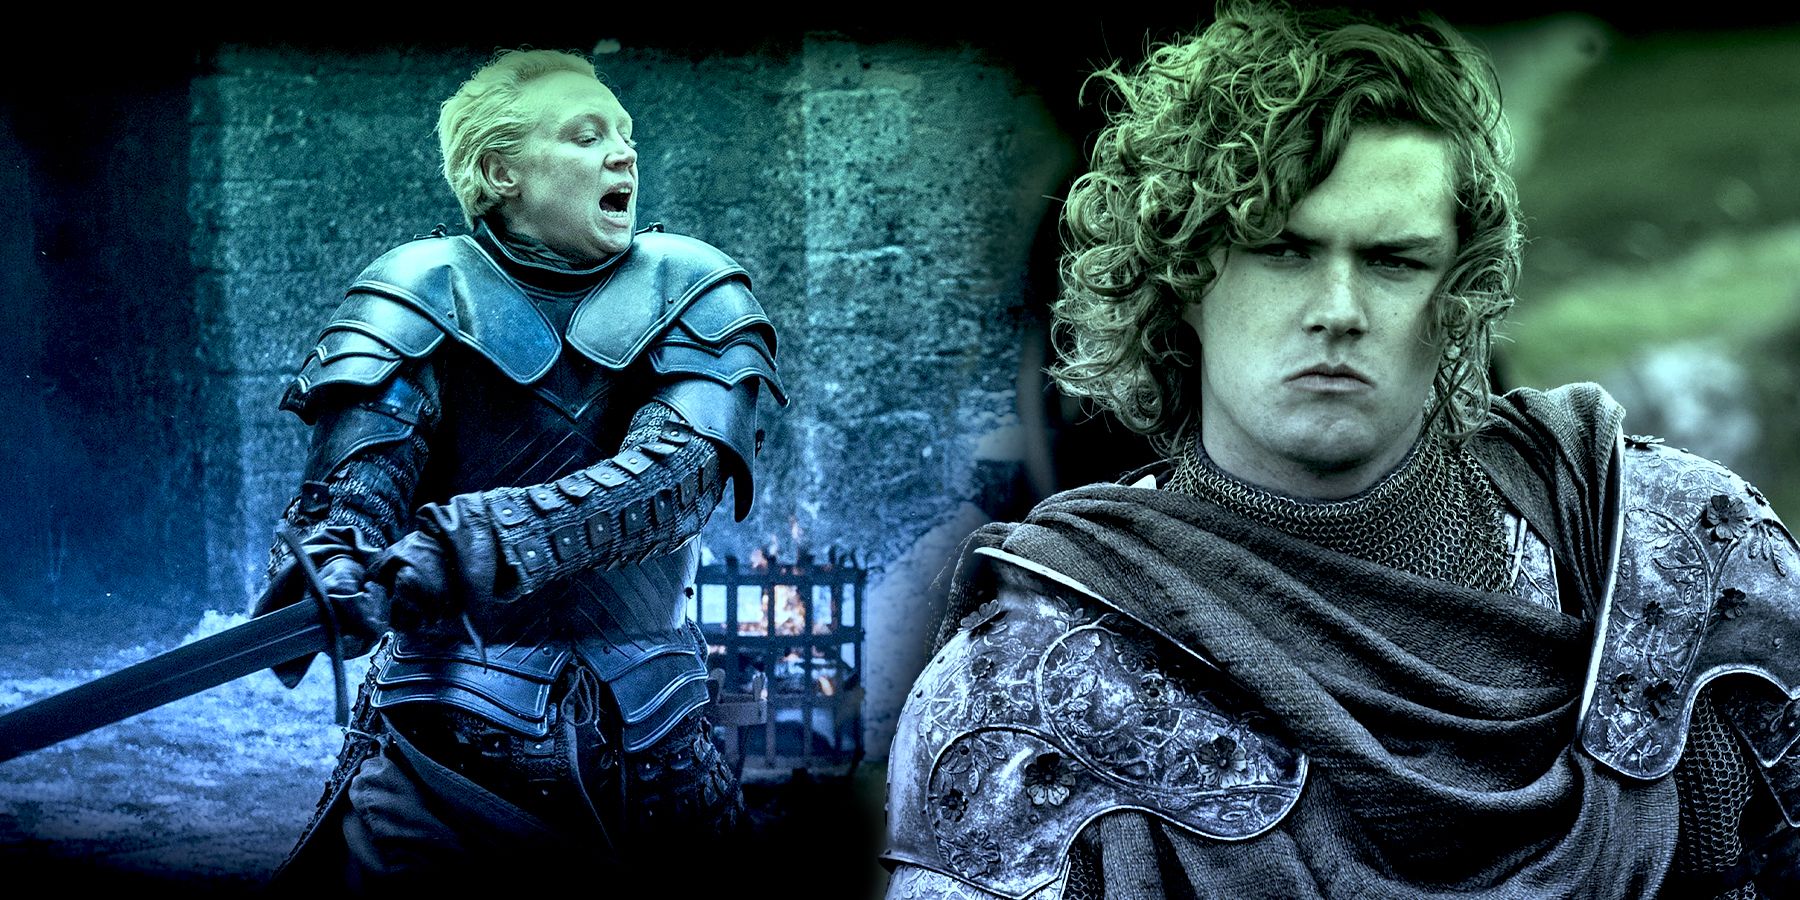 The 10 Strongest Fighters In The Game Of Thrones Books, Ranked